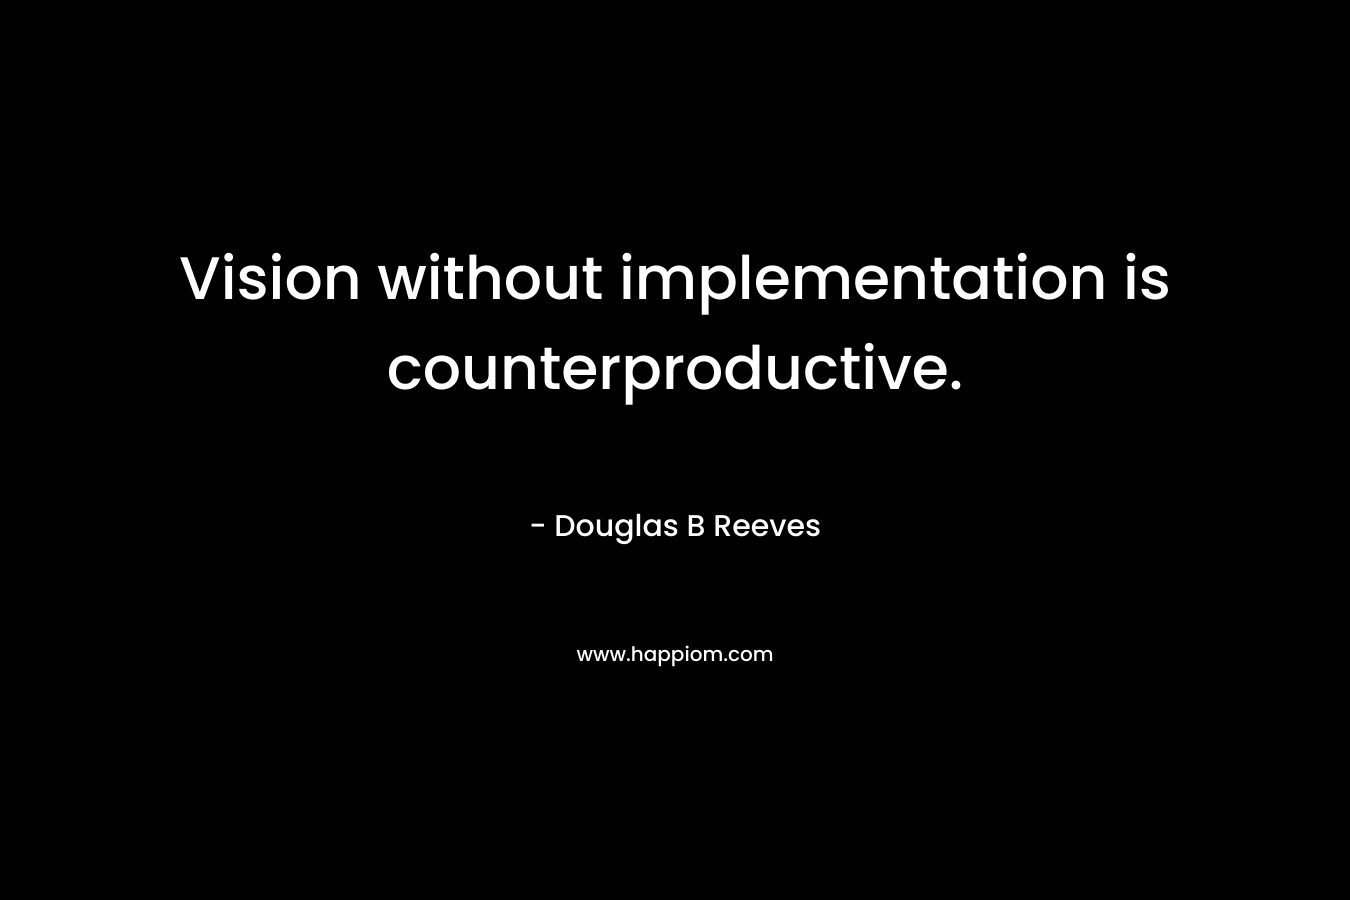 Vision without implementation is counterproductive. – Douglas B Reeves